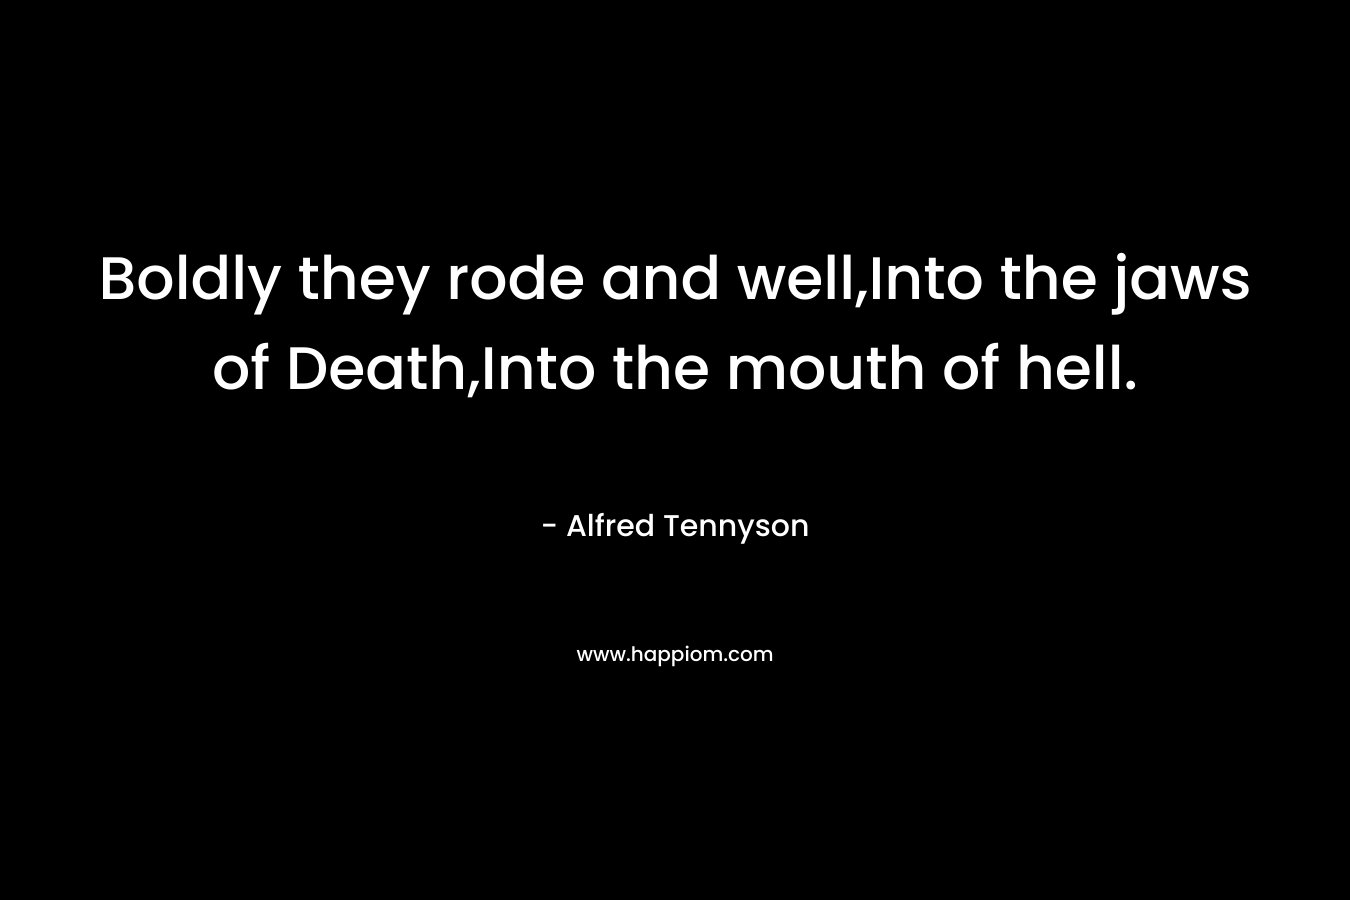 Boldly they rode and well,Into the jaws of Death,Into the mouth of hell.